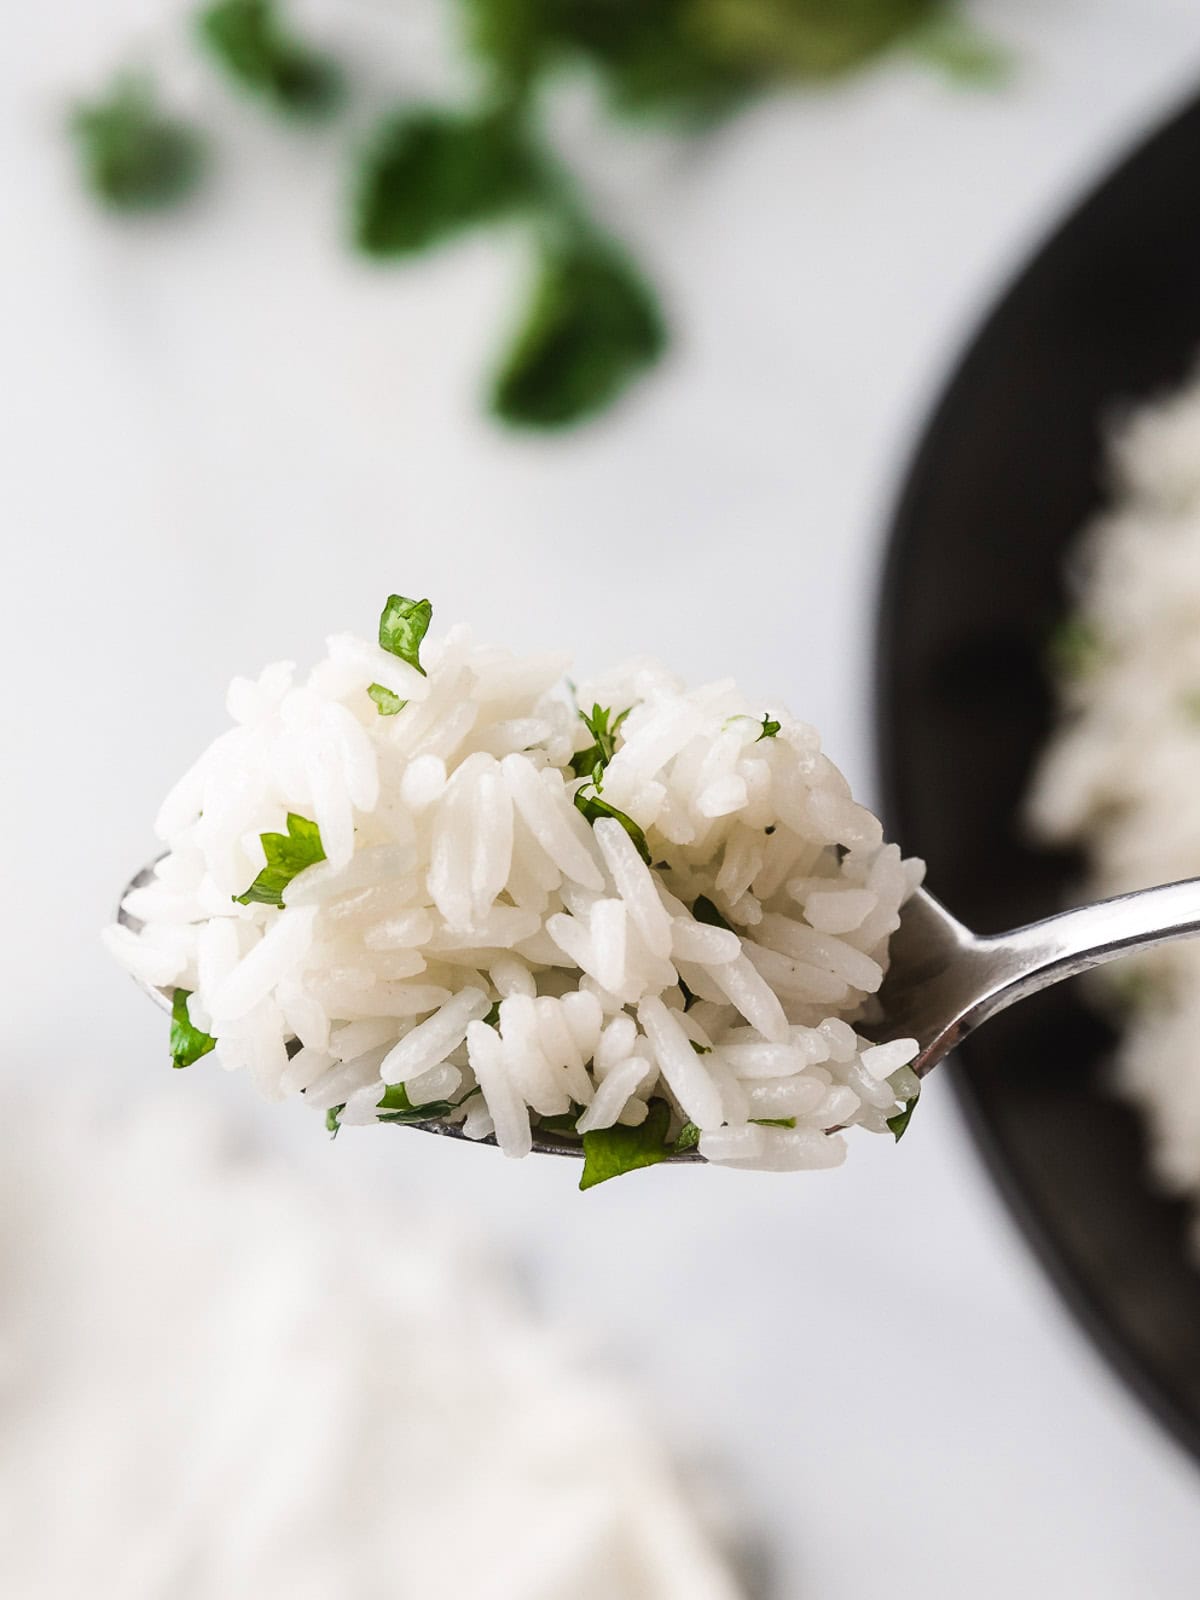 Cilantro lime rice on a fork.